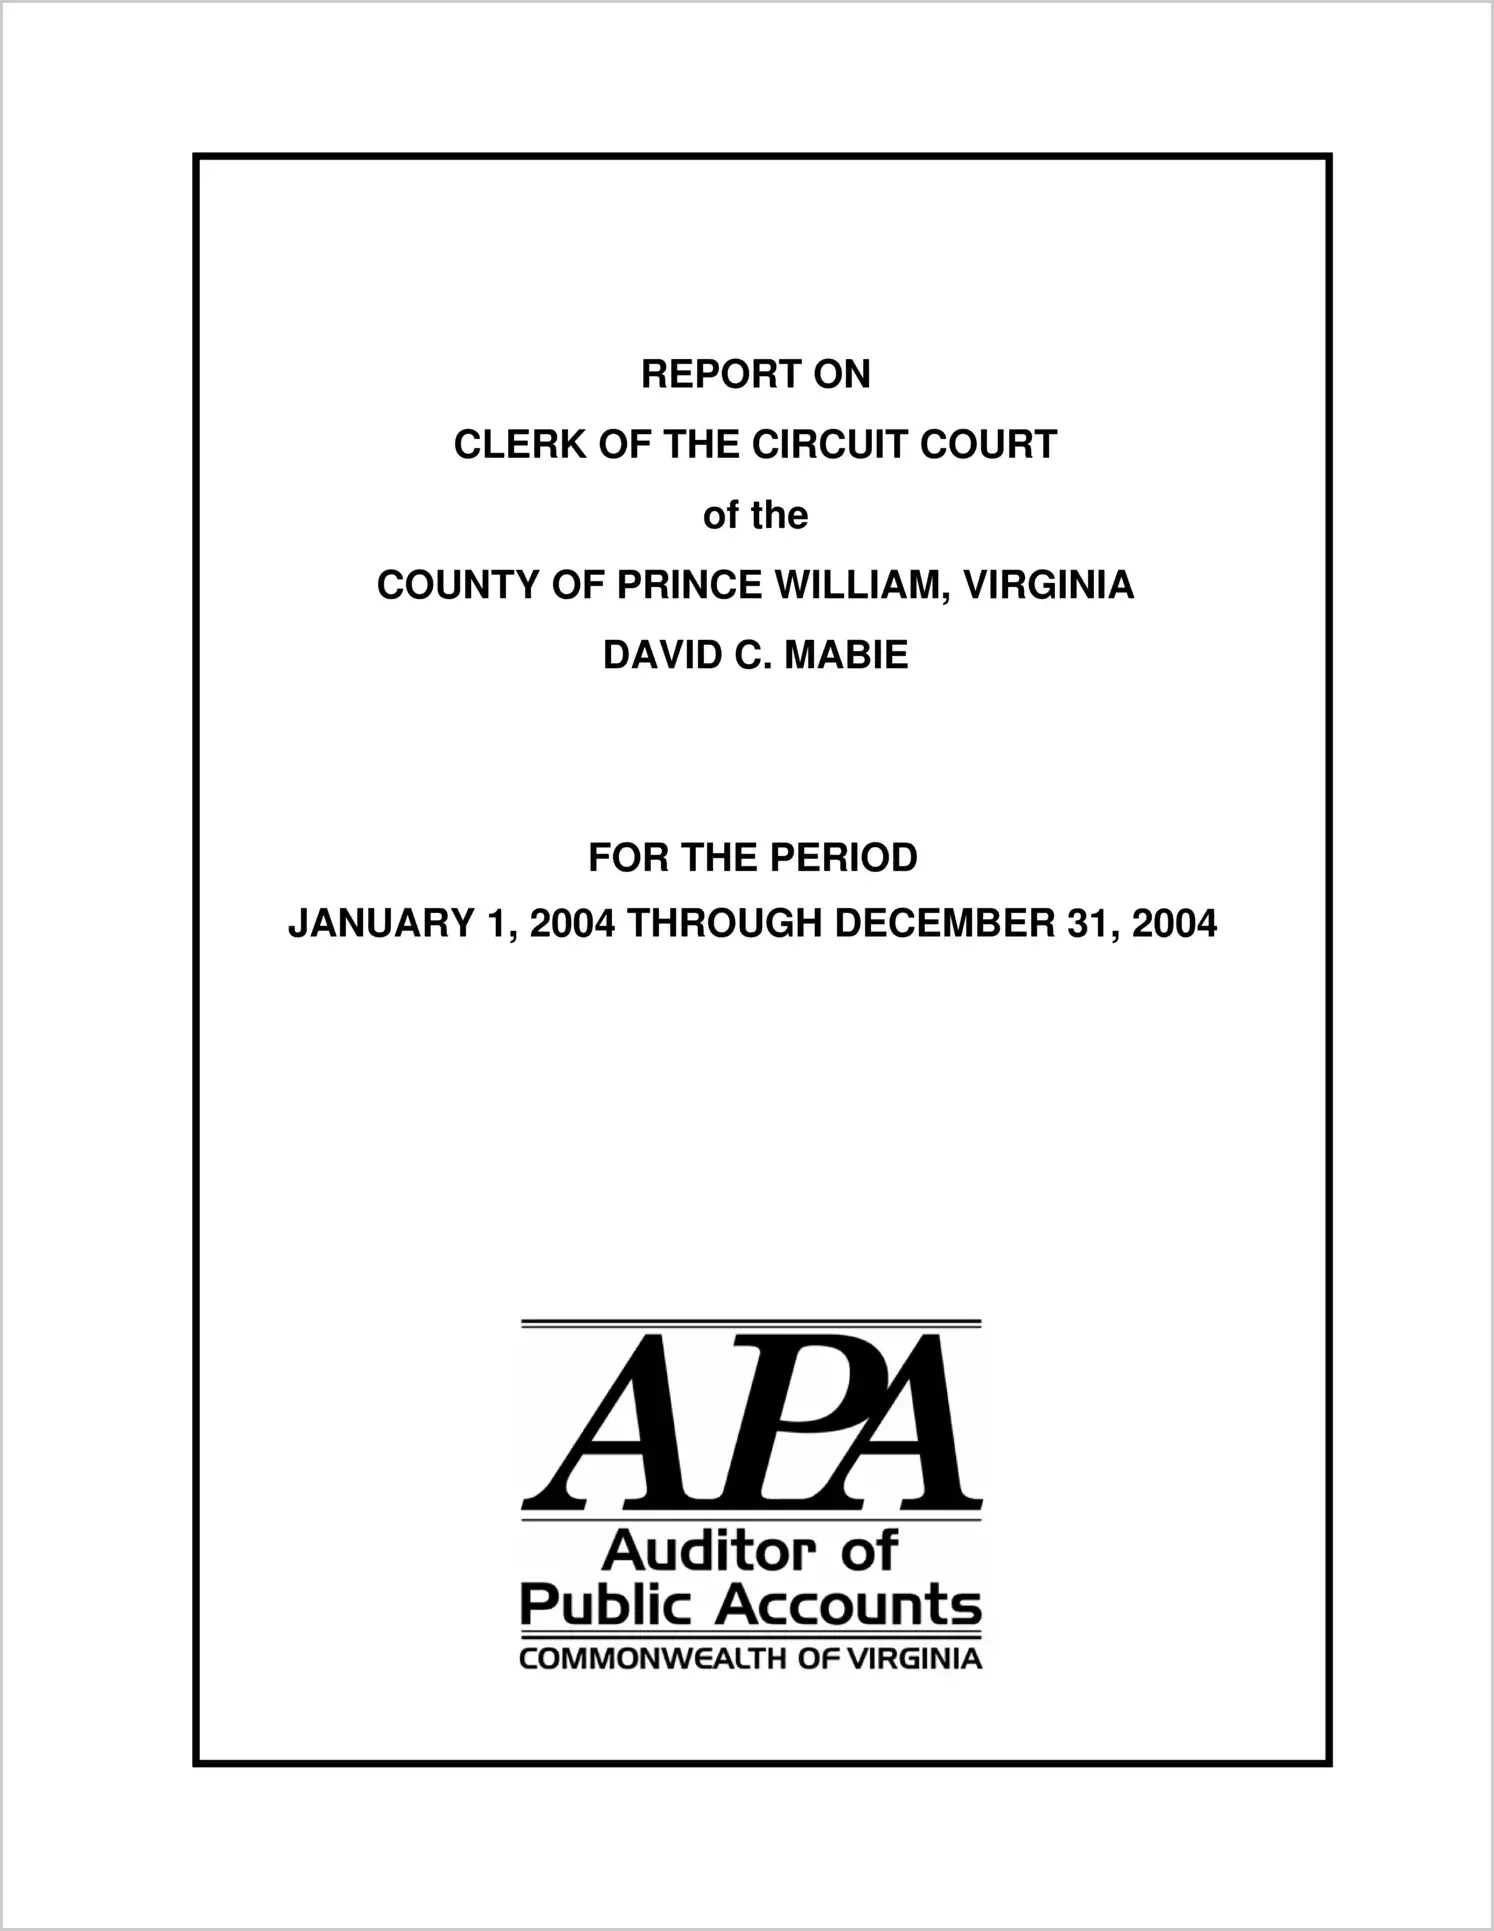 Clerk of the Circuit Court of the County of Prince William for the period January 1, 2004 through December 31, 2004